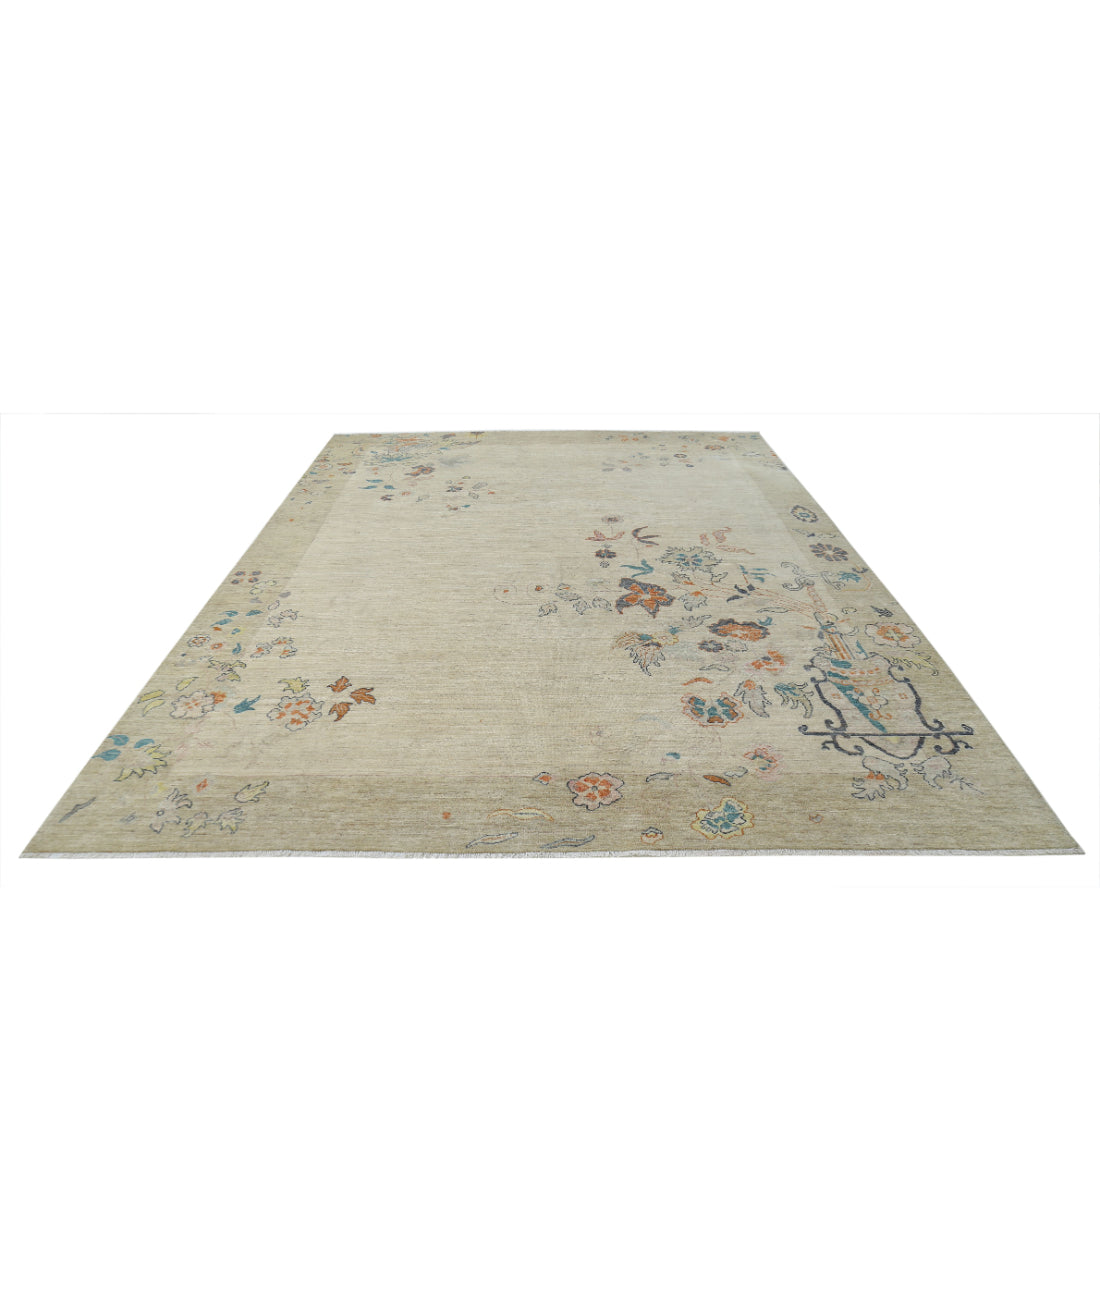 Hand Knotted Chinese Wool Rug - 8'11'' x 11'11'' 8'11'' x 11'11'' (268 X 358) / Gold / Ivory